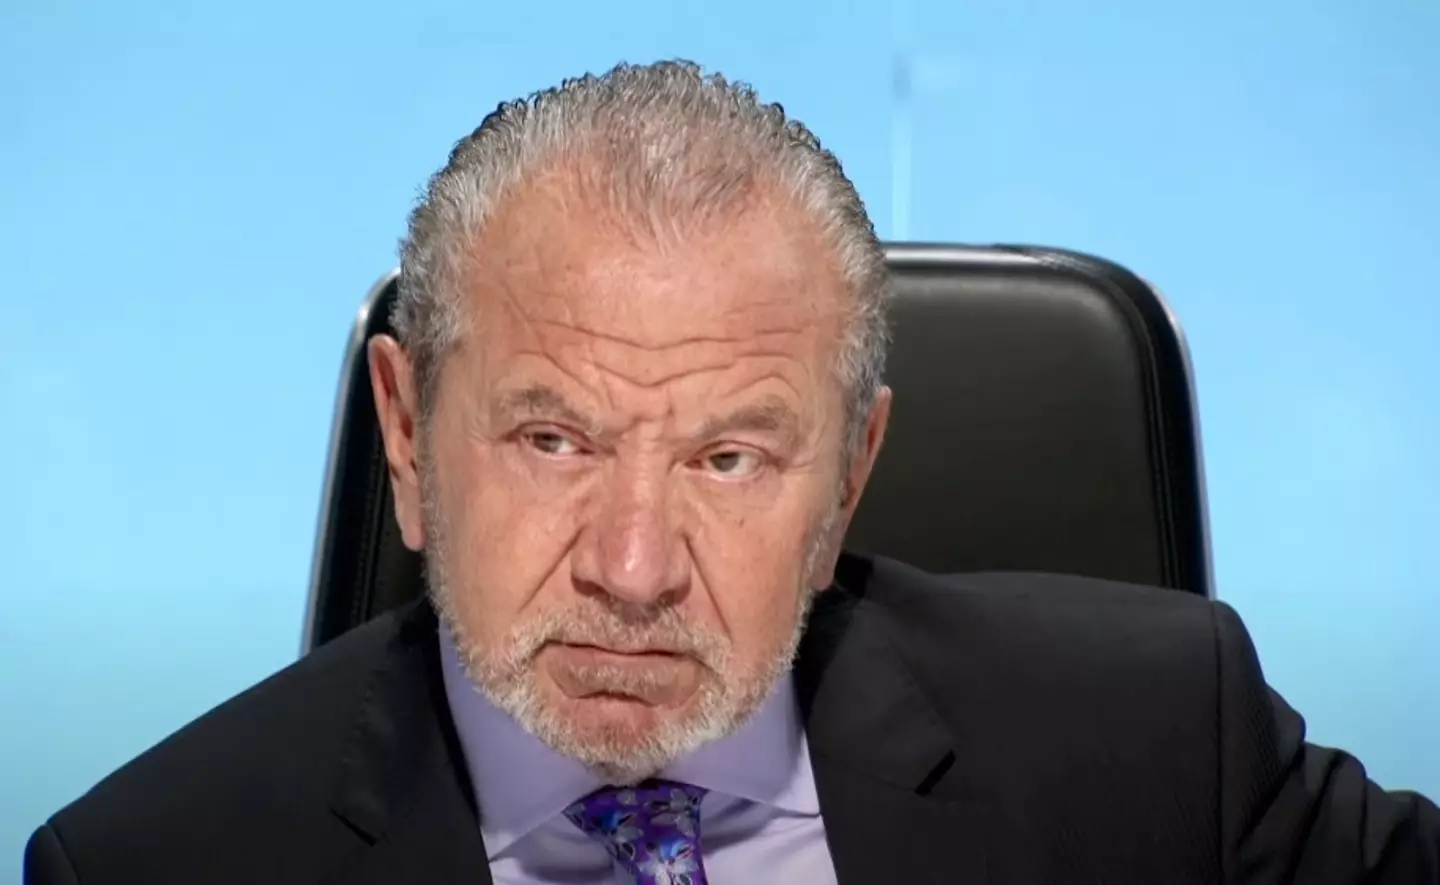 Lord Sugar, 76, has suggested that Ramsay should stick to 'cooking'.